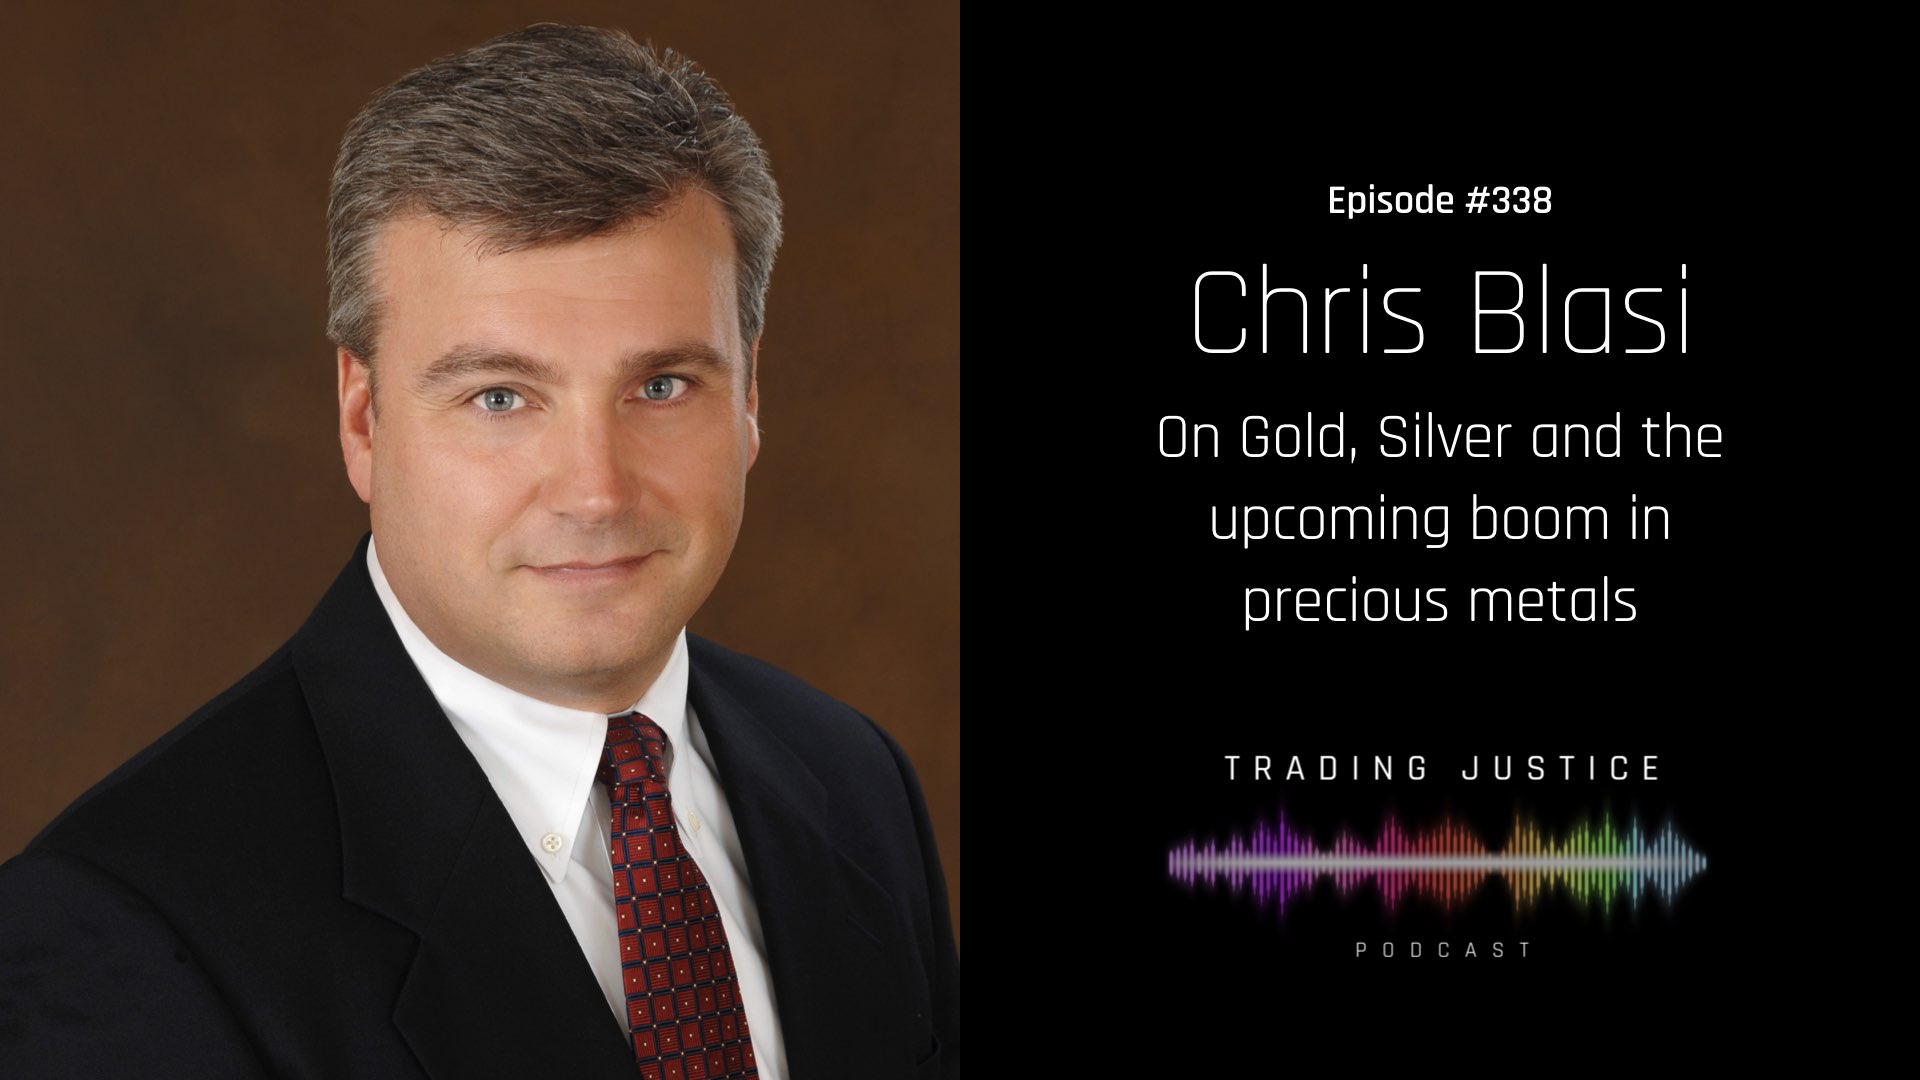 Episode 338: Chris Blasi on Gold, Silver and the upcoming boom in precious metals | Trading Justice Podcast